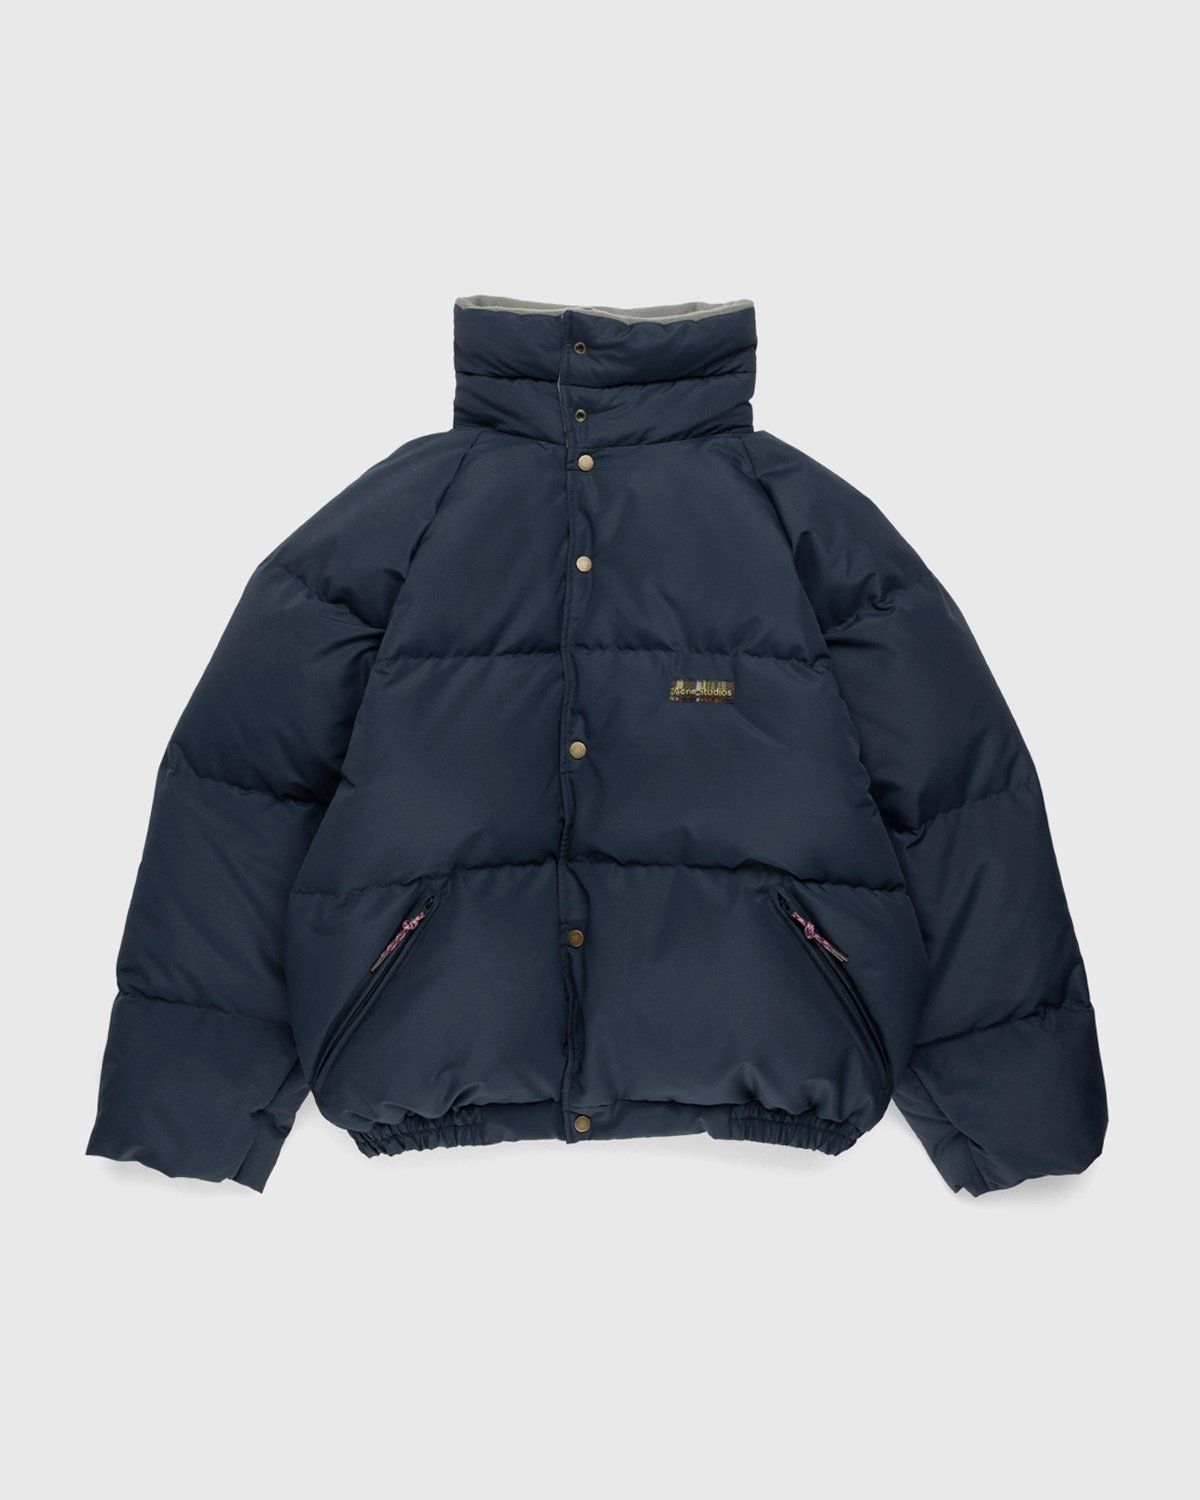 Acne Studios – Down Puffer Jacket Charcoal Grey - Outerwear - Grey - Image 1